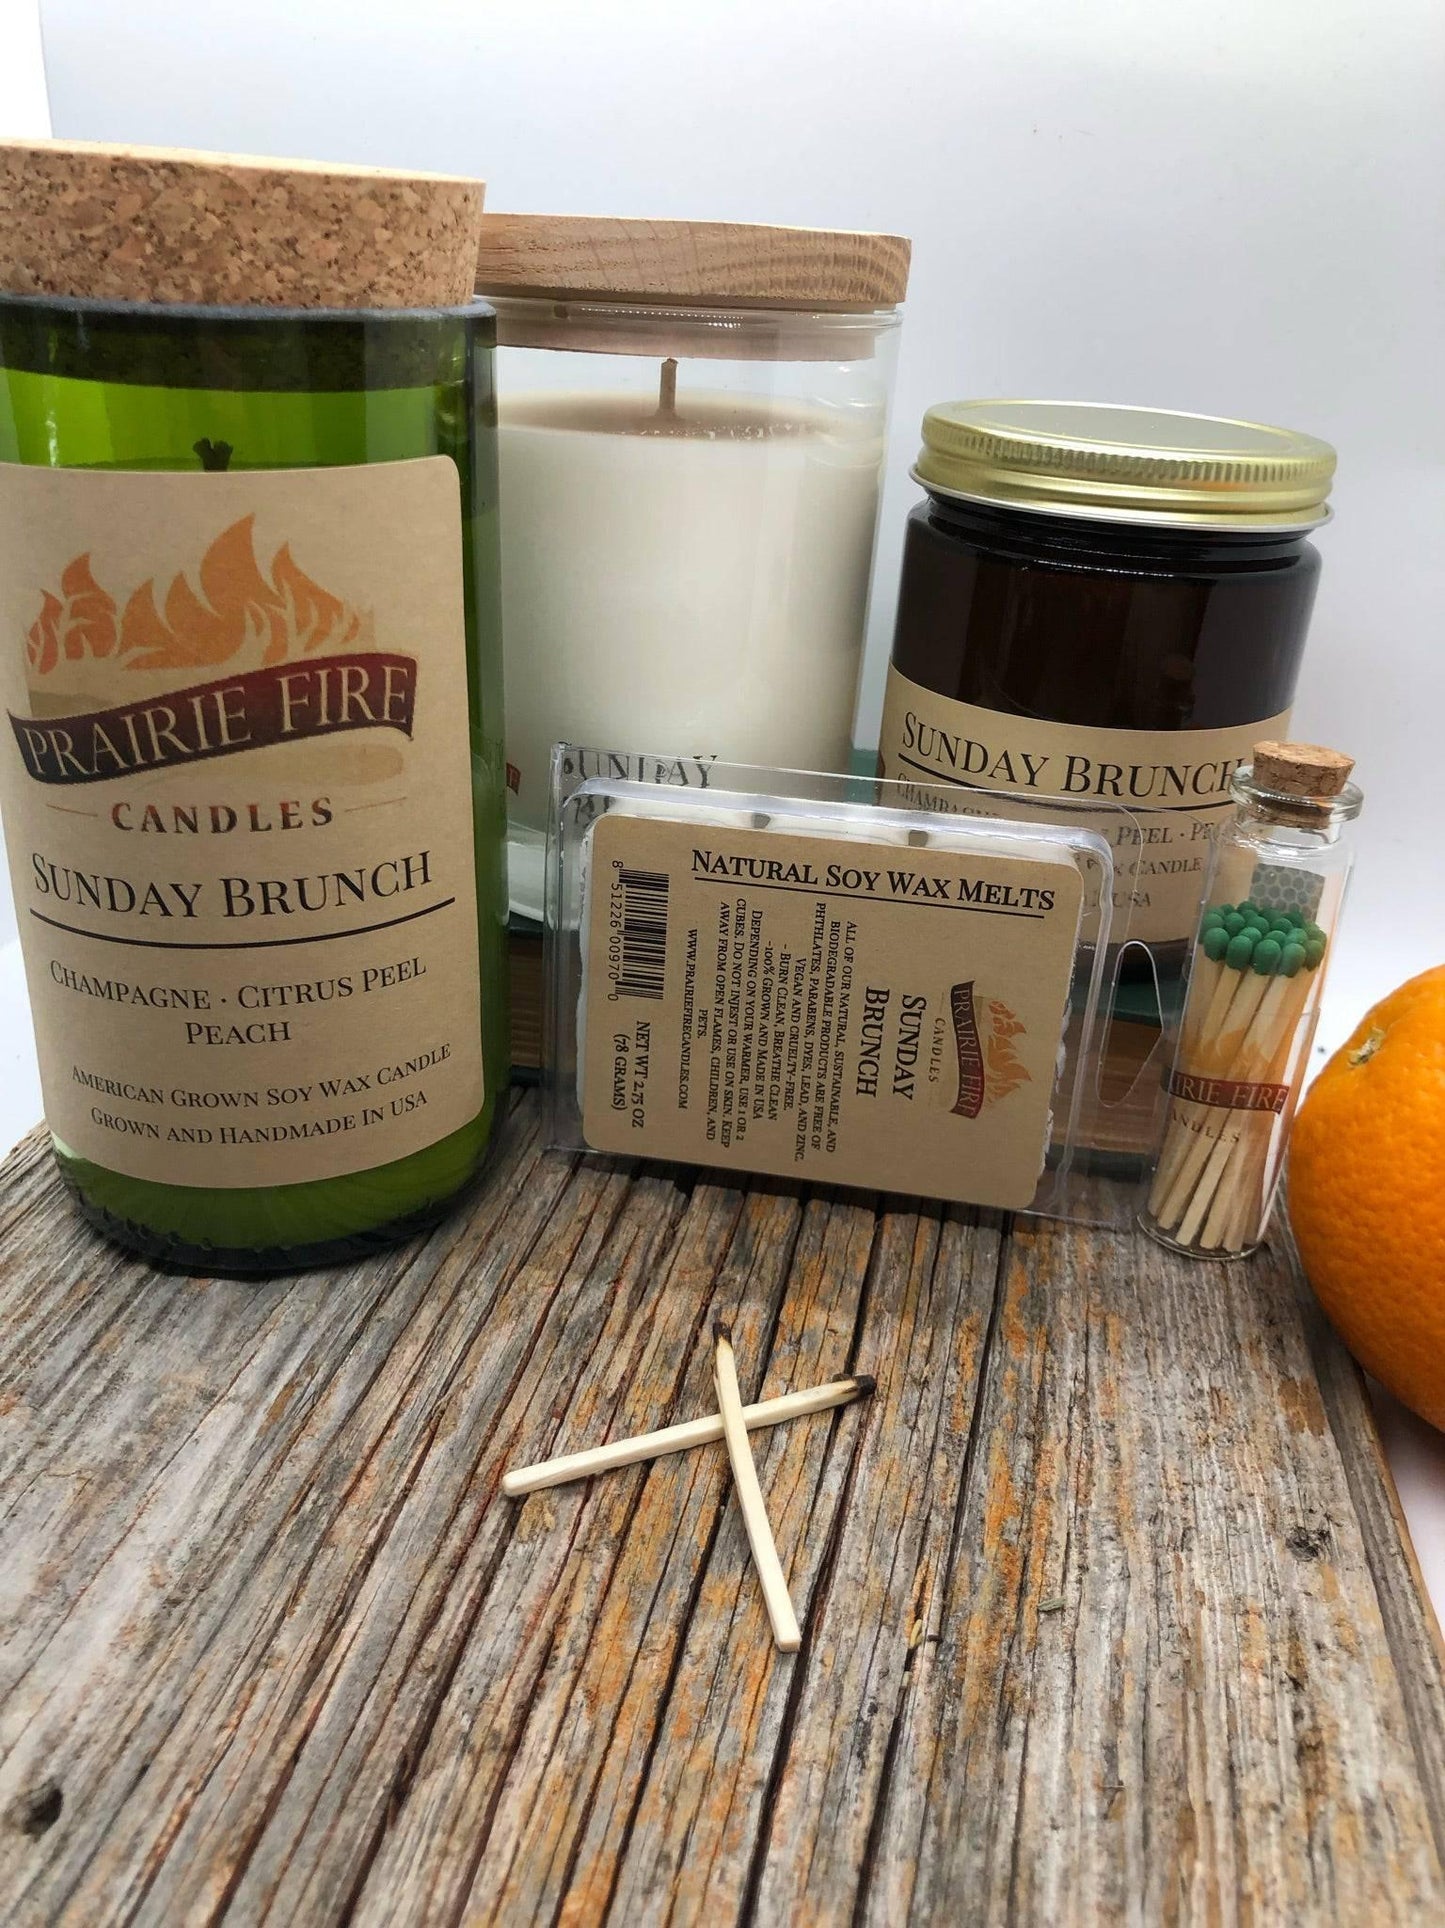 Sunday Brunch Soy Wax Candle | Repurposed Wine Bottle Candle Natural Cork | Handmade in USA Candle | Eco-Friendly Candle | Non-Toxic Soy Candle - Prairie Fire Candles